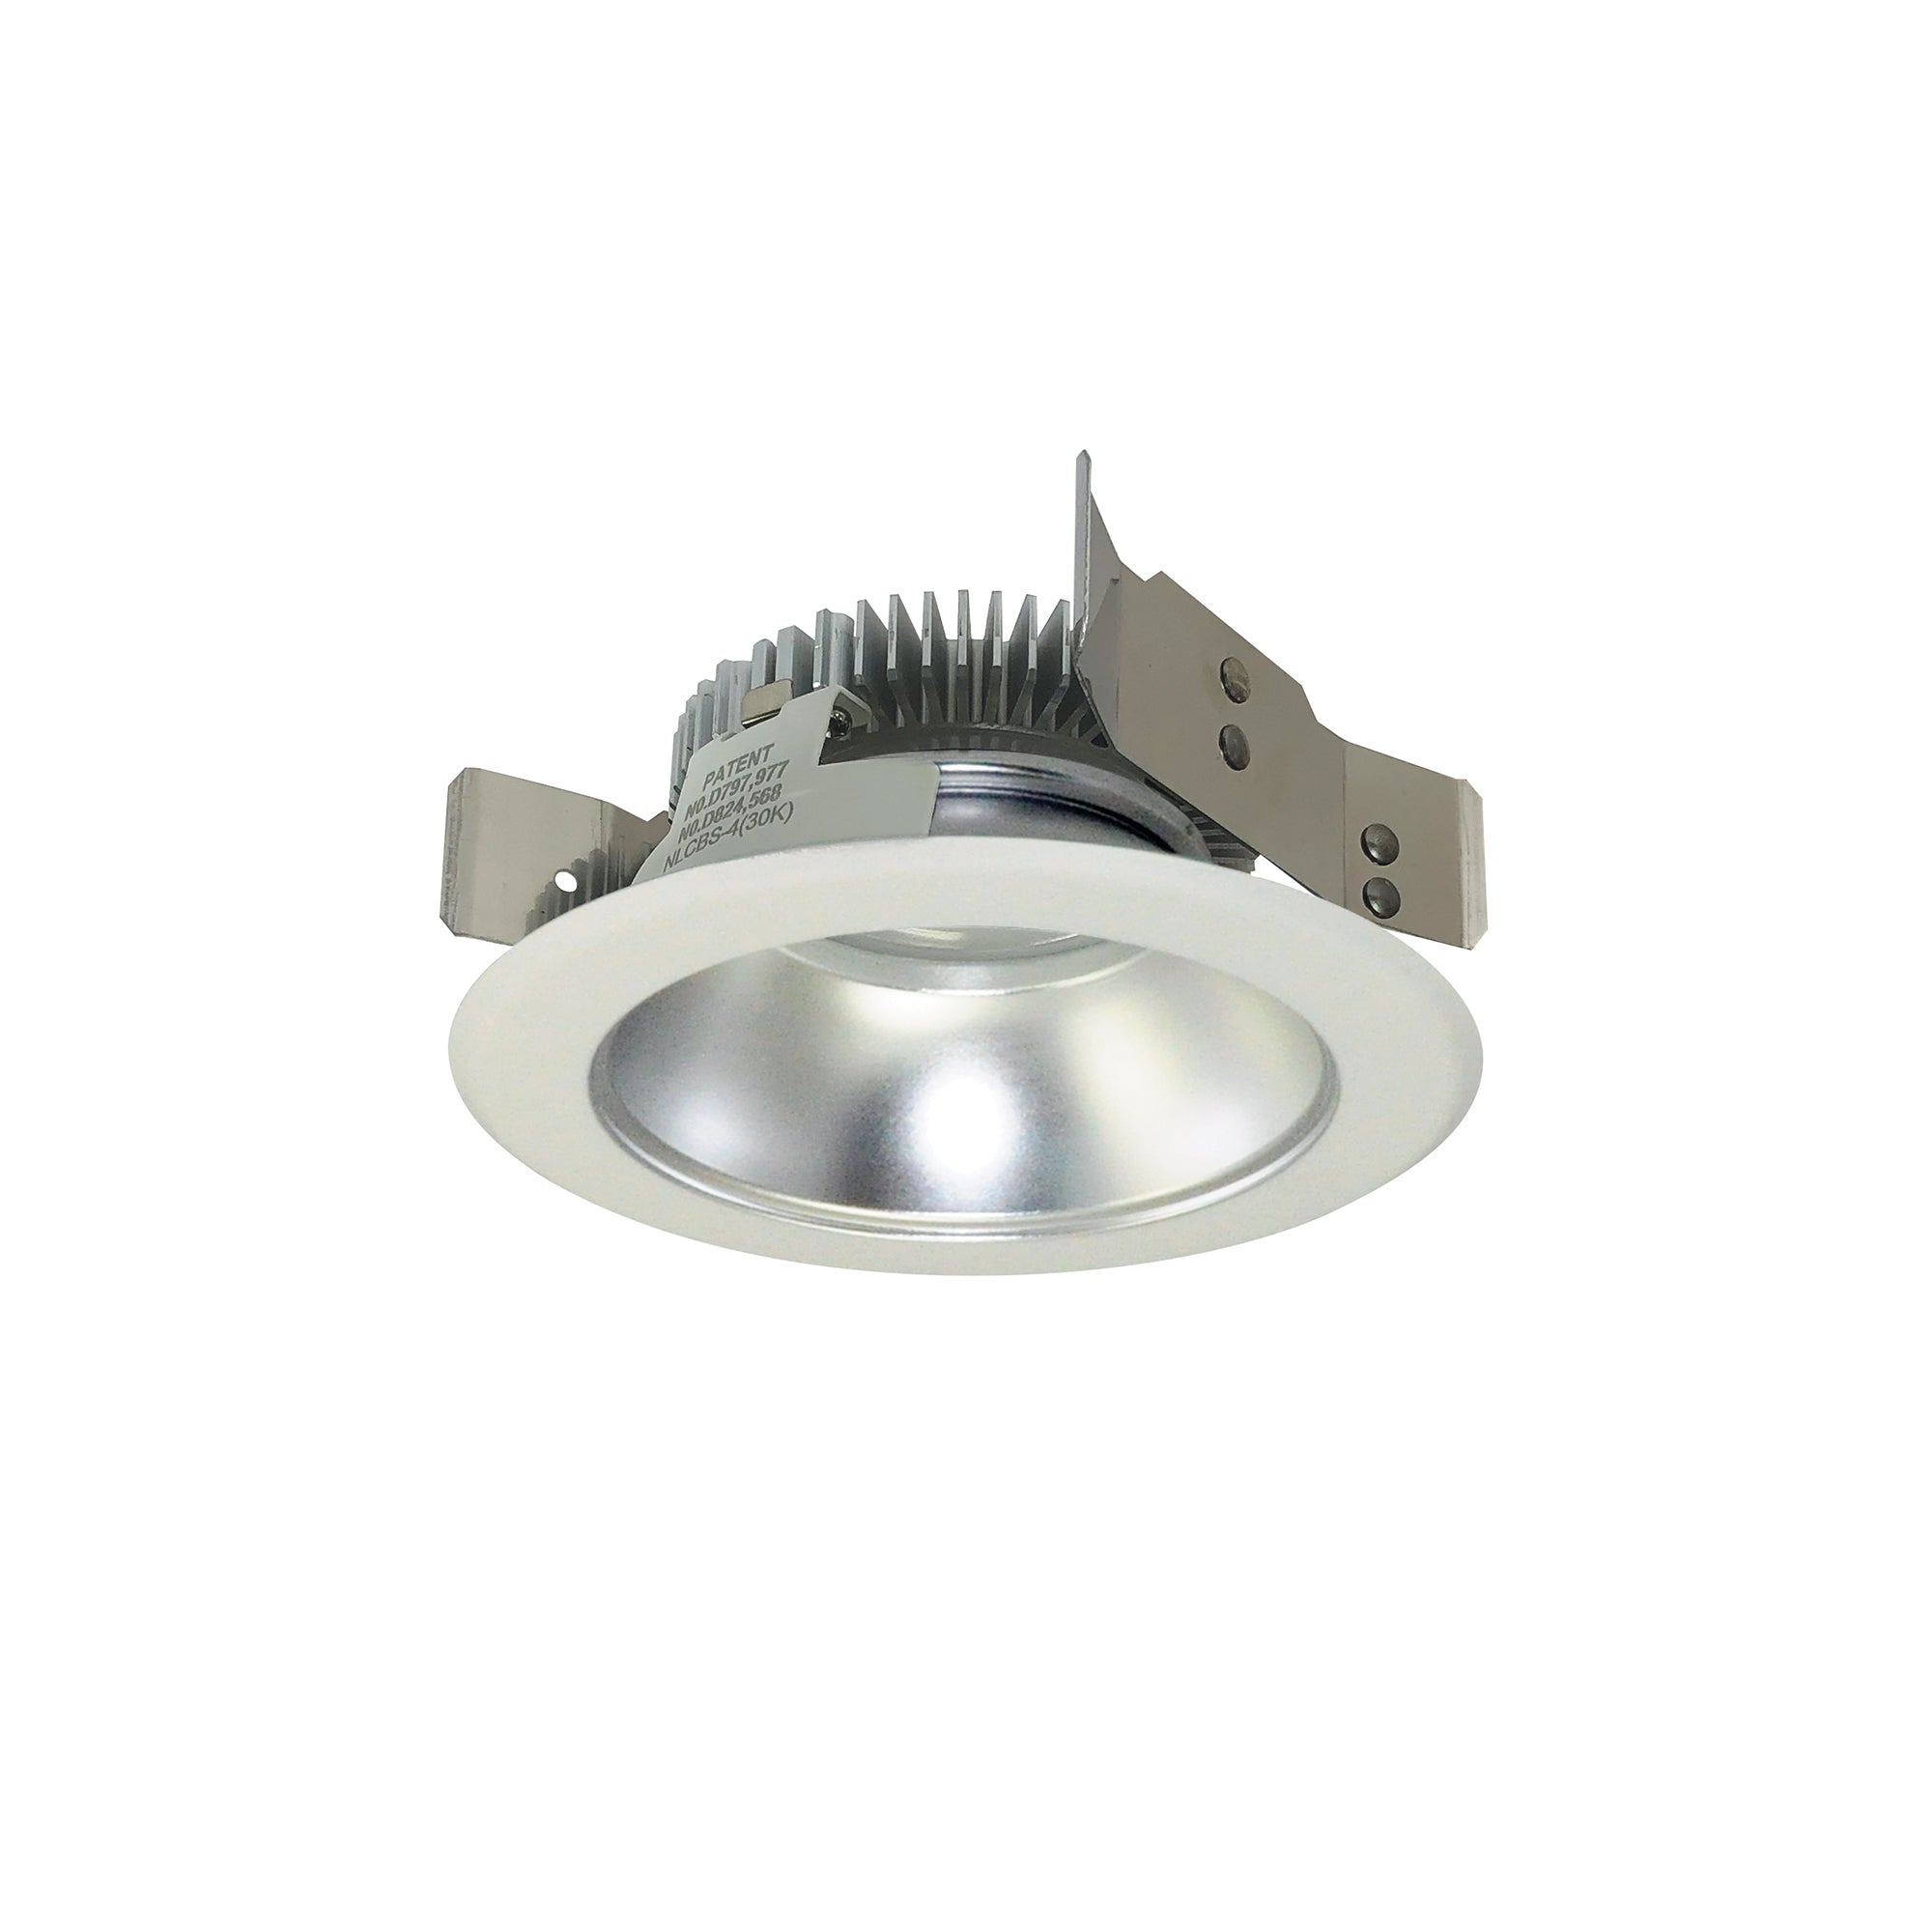 Nora Lighting NLCBS-4W511240DMPW - Recessed - 4 Inch Cobalt Shallow High Lumen LED Trim, Round Reflector, 1250lm, 4000K, Diffused/MPW